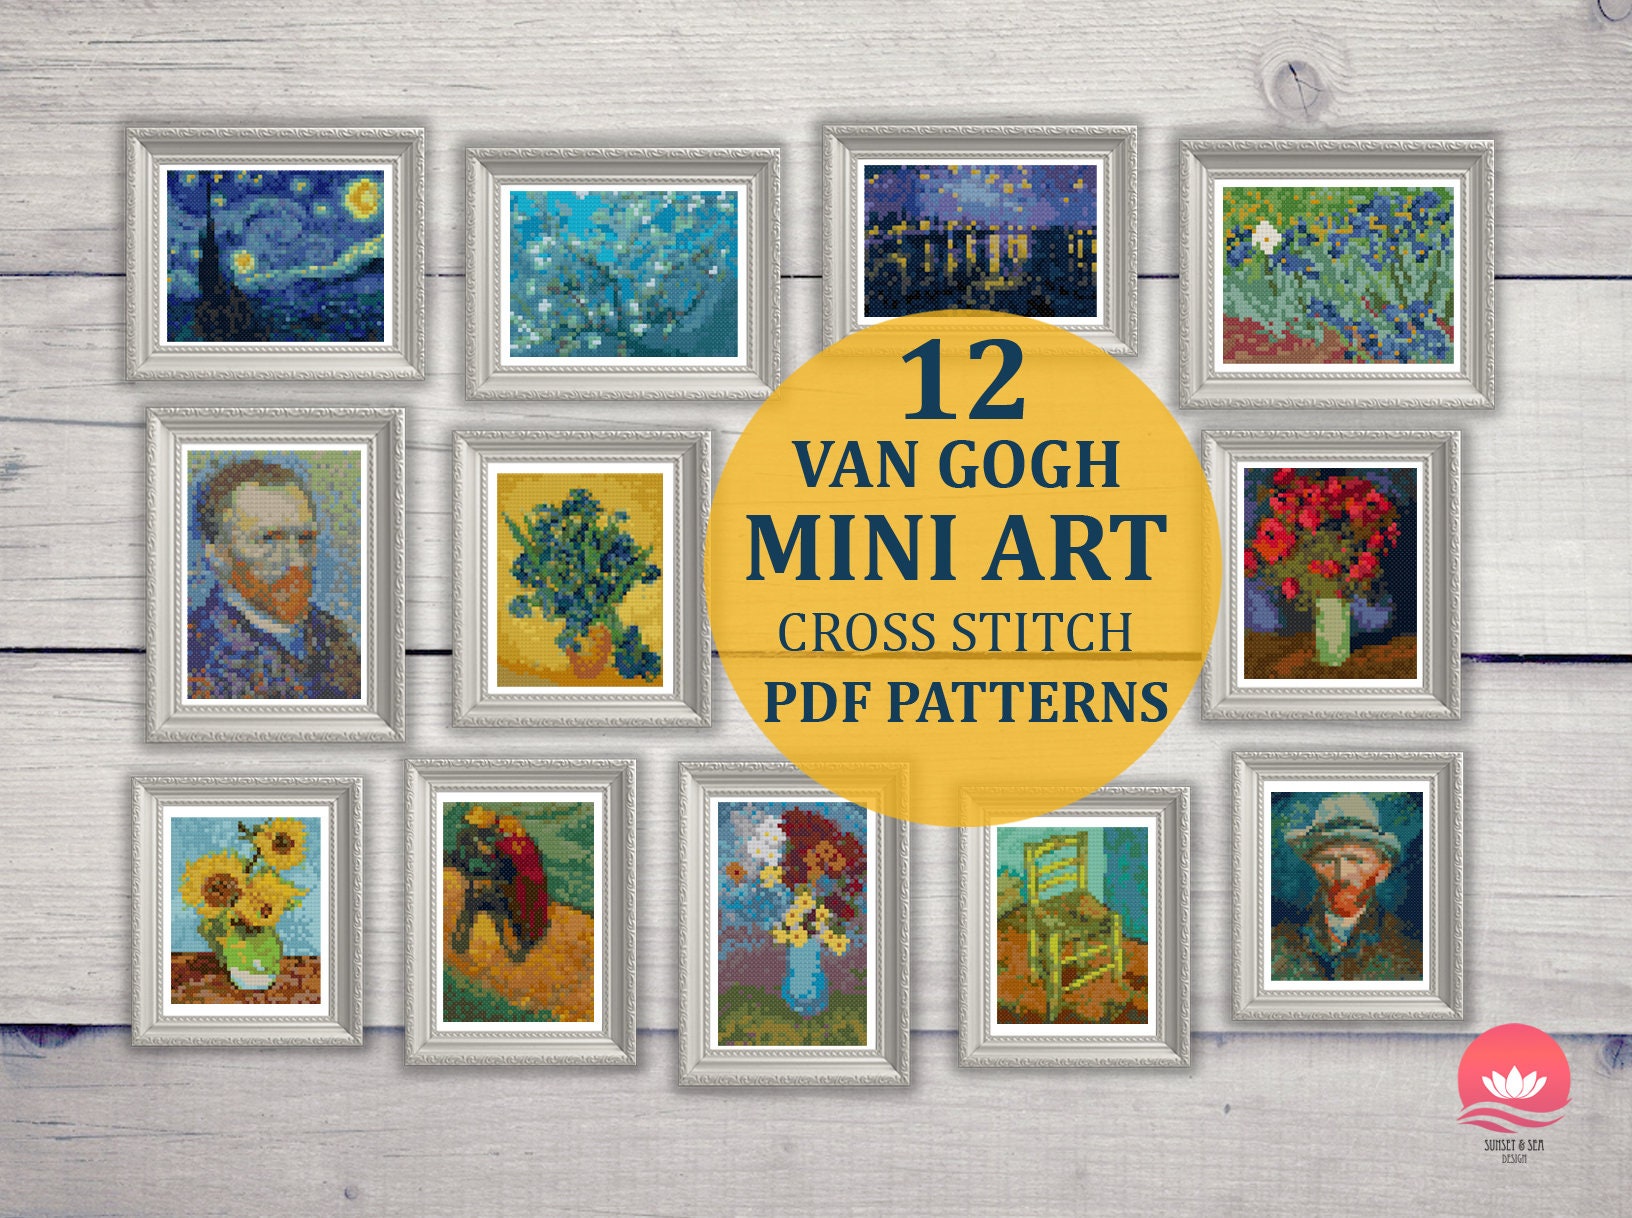 Paint By Number Kit for Adults - Bedroom in Arles by Van Gogh